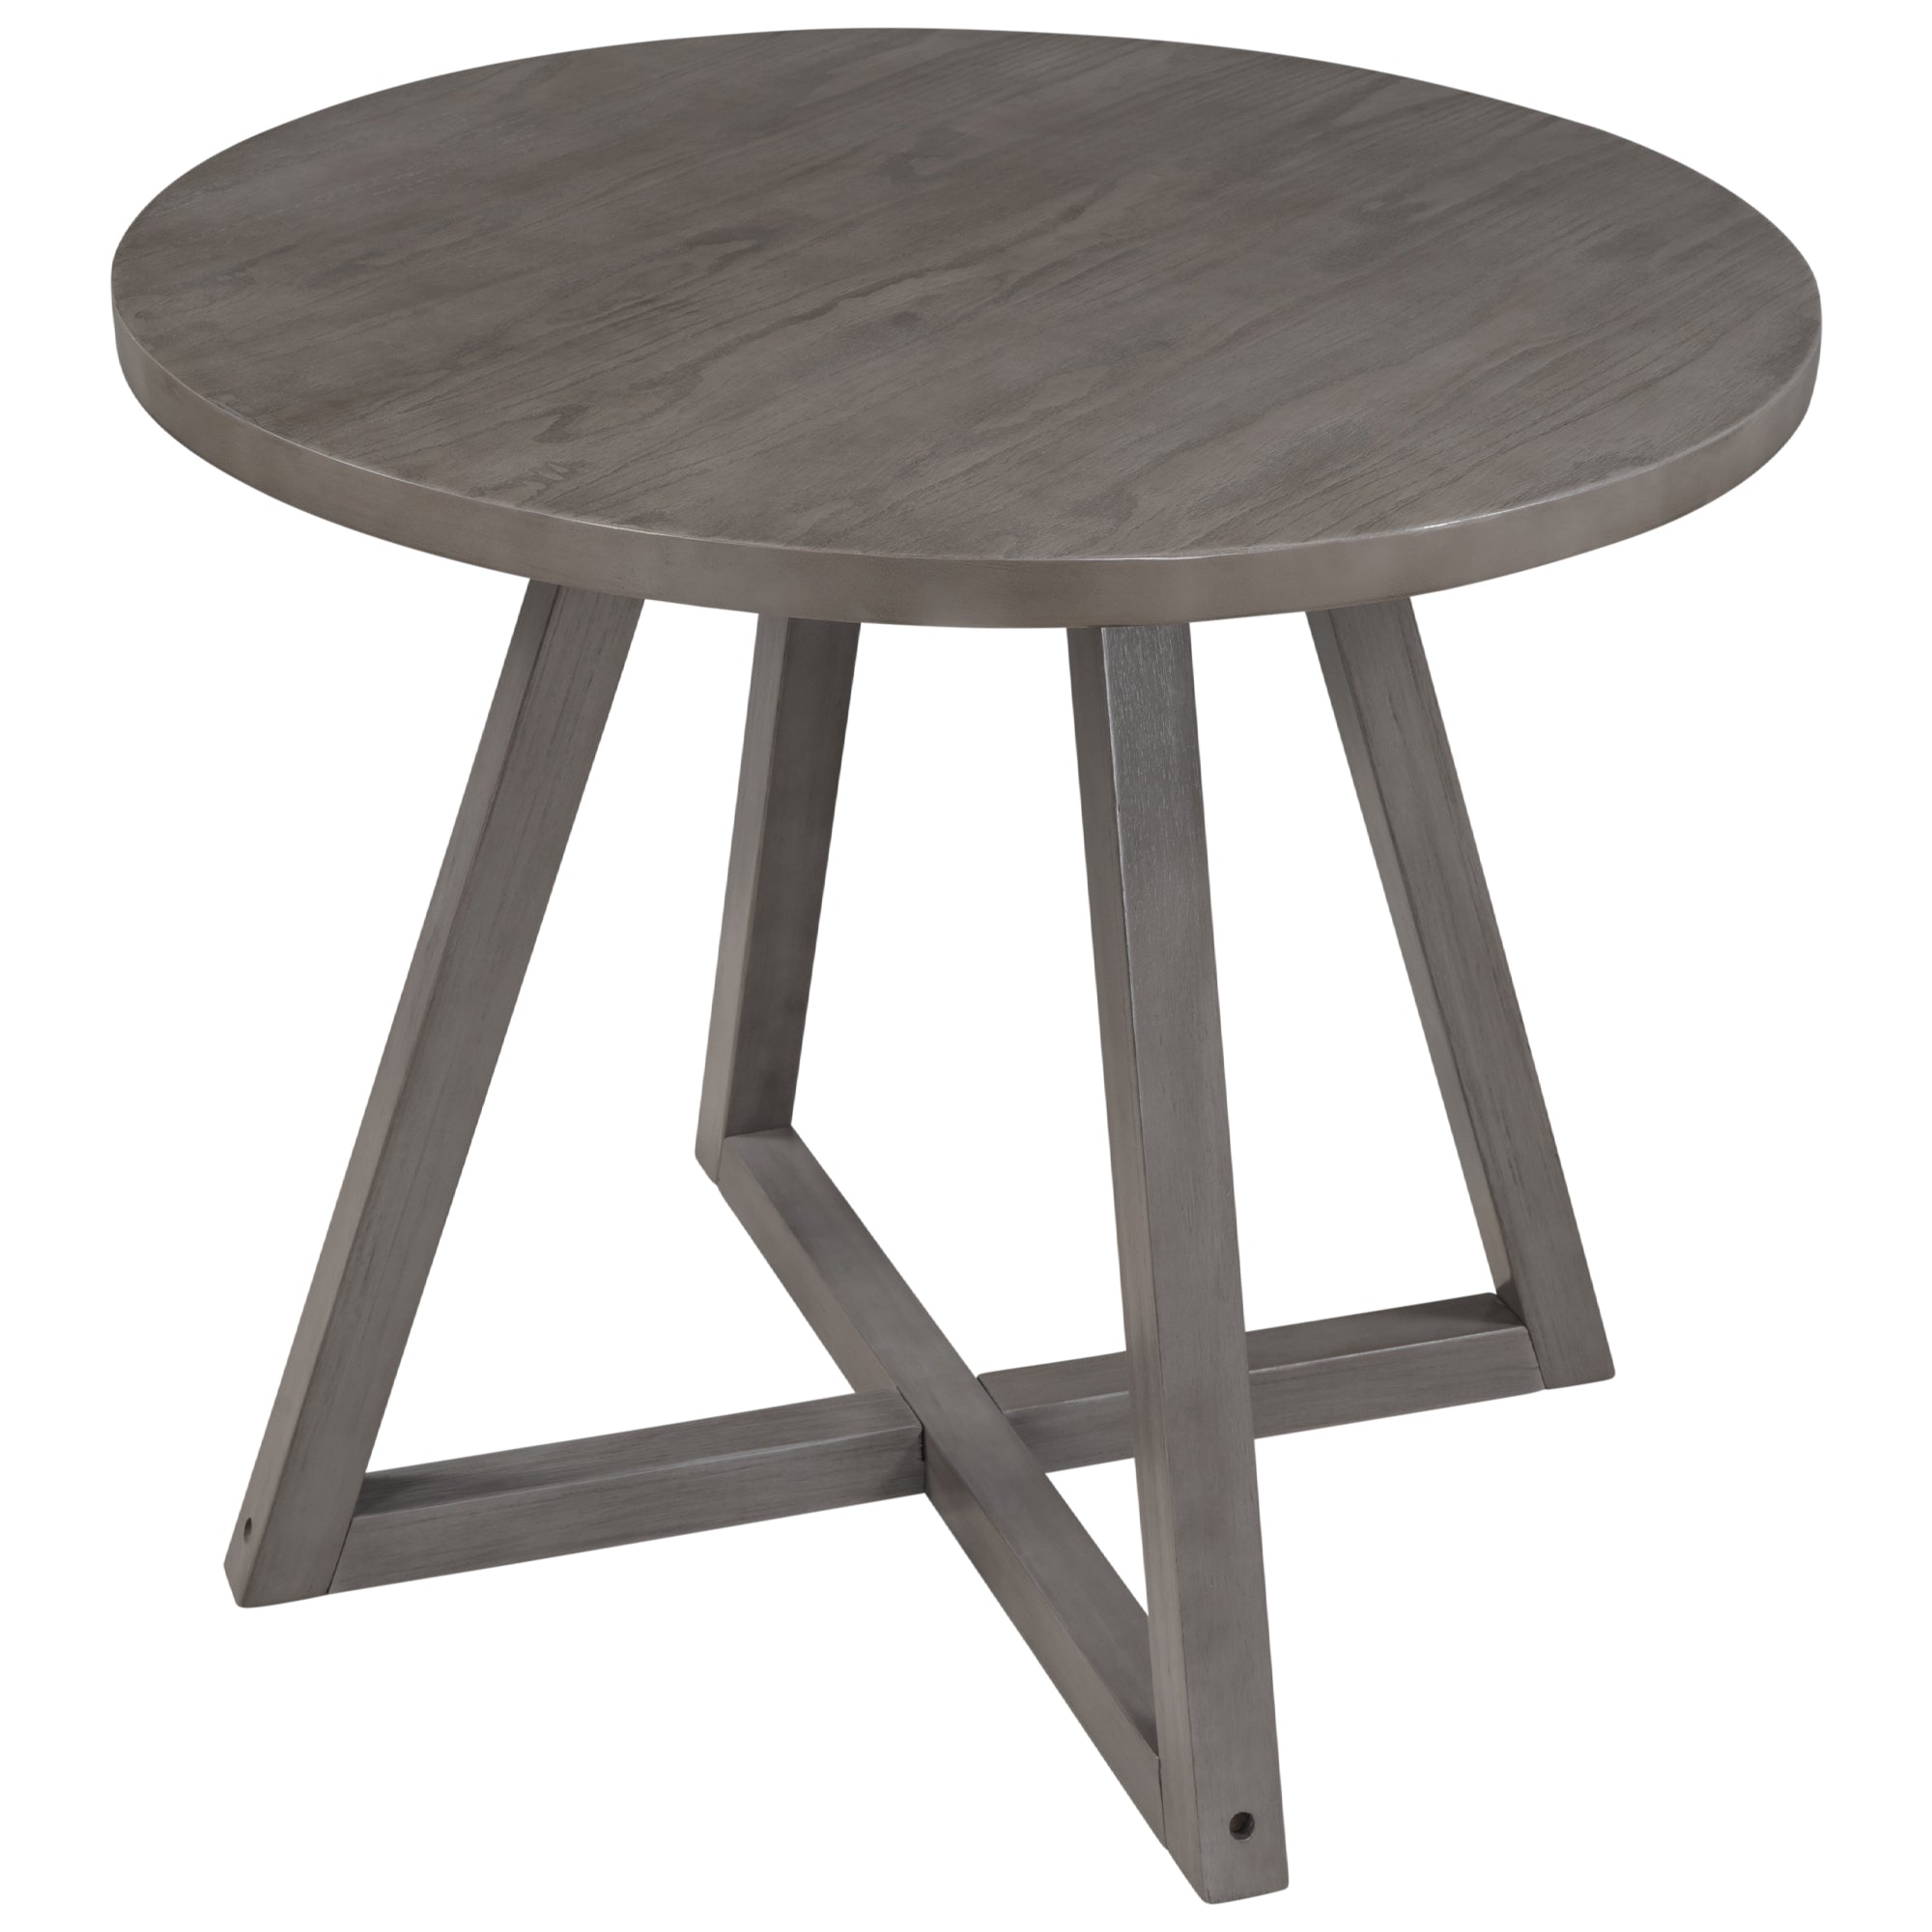 Mid-Century Wood Round Dining Table with X-shape Legs for Small Places, Gray